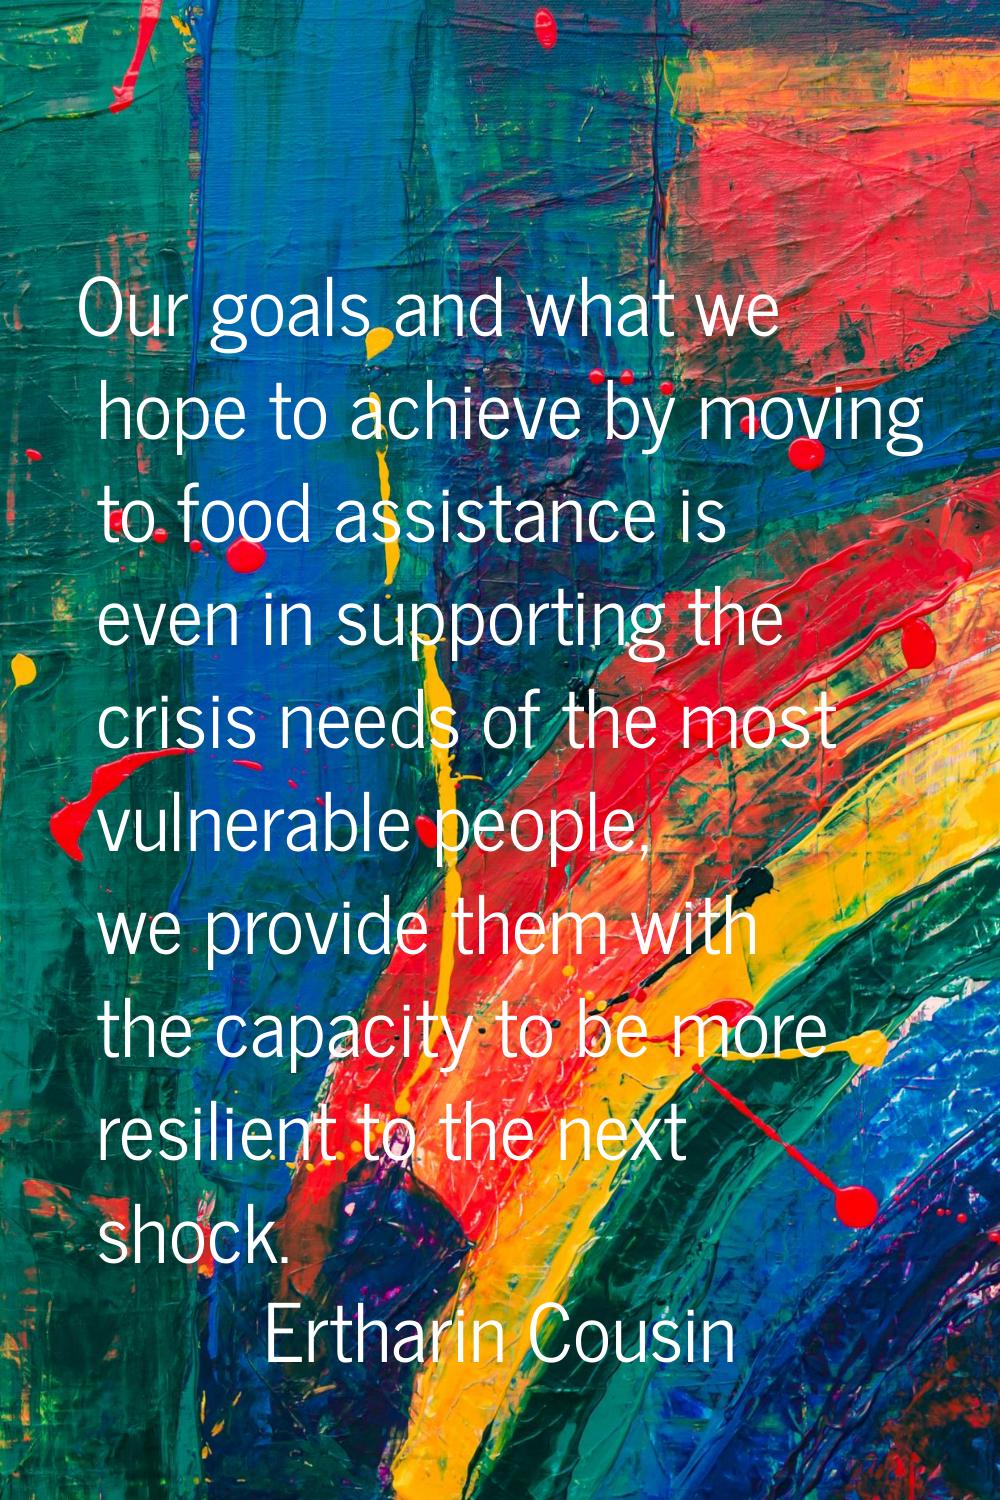 Our goals and what we hope to achieve by moving to food assistance is even in supporting the crisis